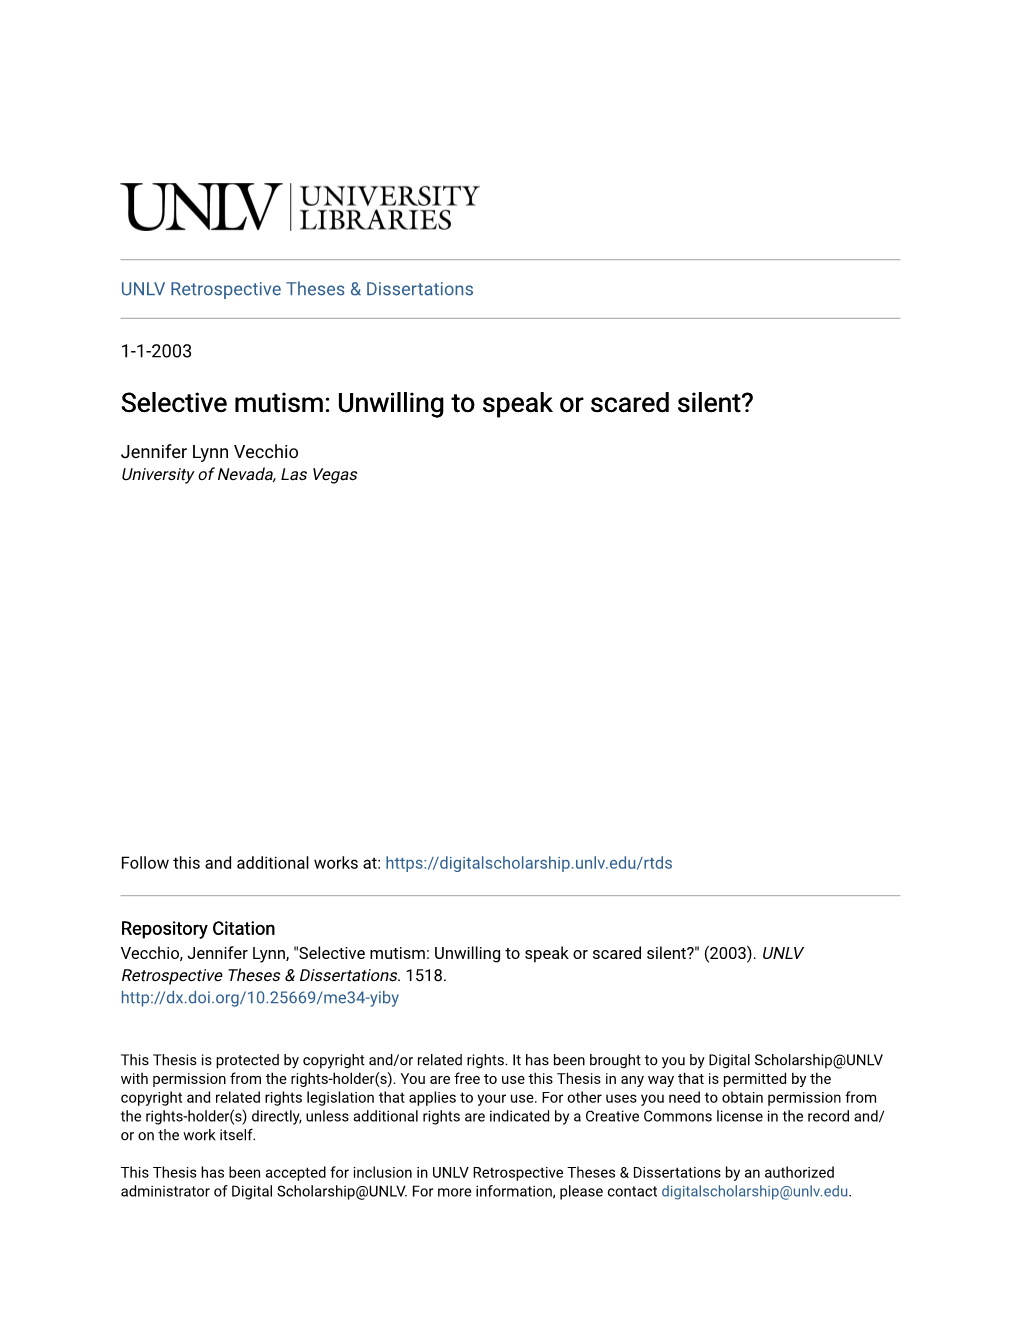 Selective Mutism: Unwilling to Speak Or Scared Silent?